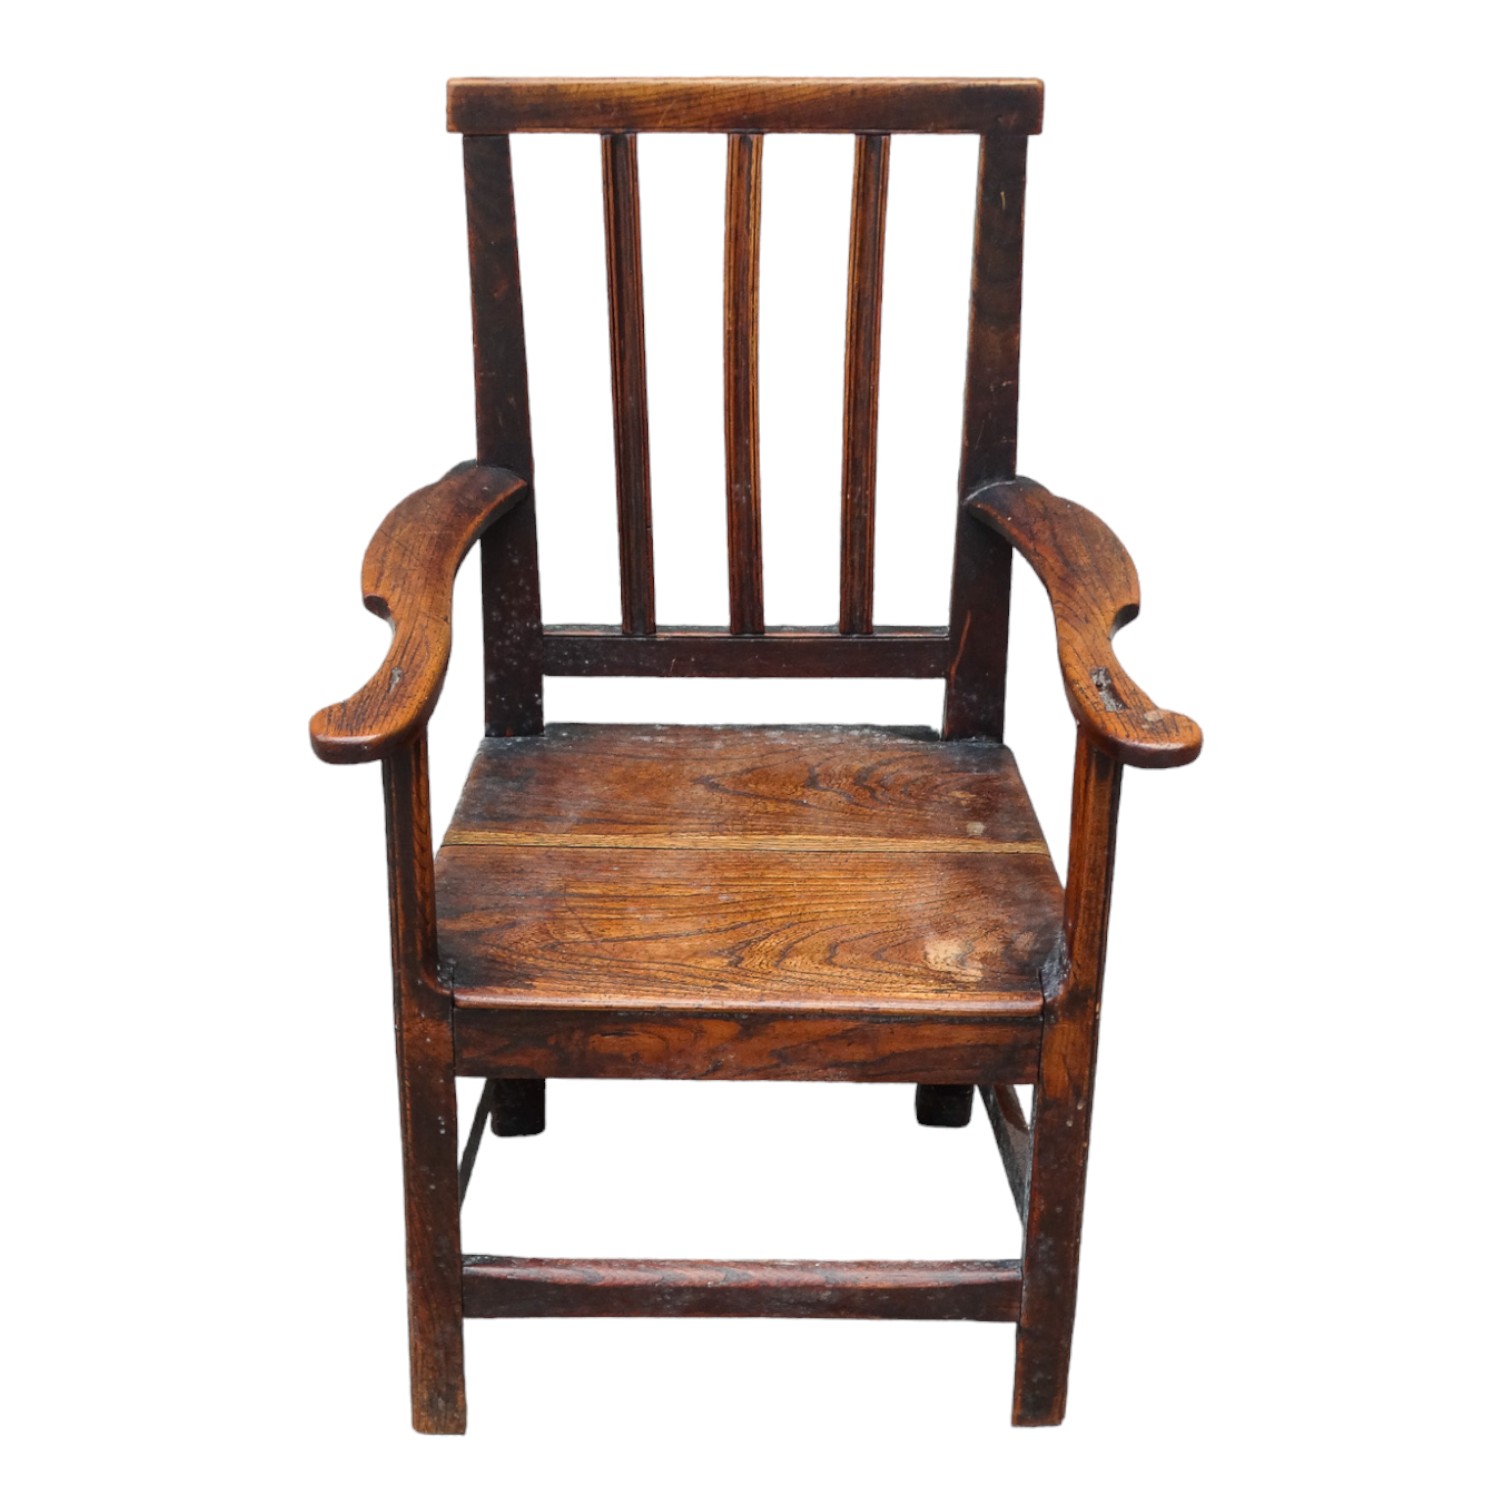 A late 18th century elm child's chair - the stick back above open arms and solid seat on square legs